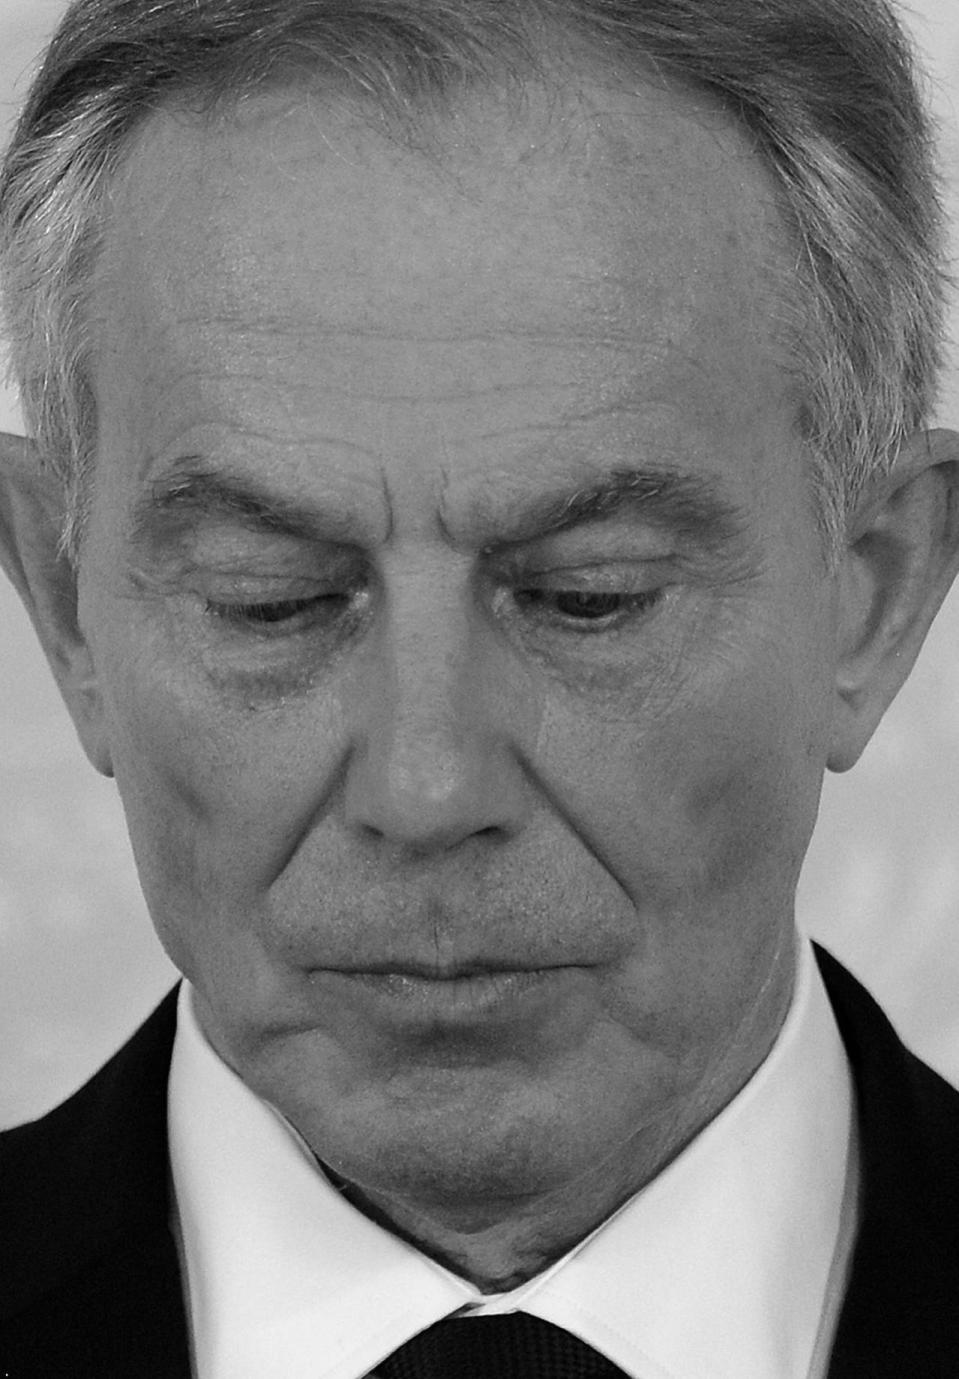 On the defensive: Tony Blair reacts to the Chilcot Inquiry findings at Admiralty House, London (Wednesday, 5 July).